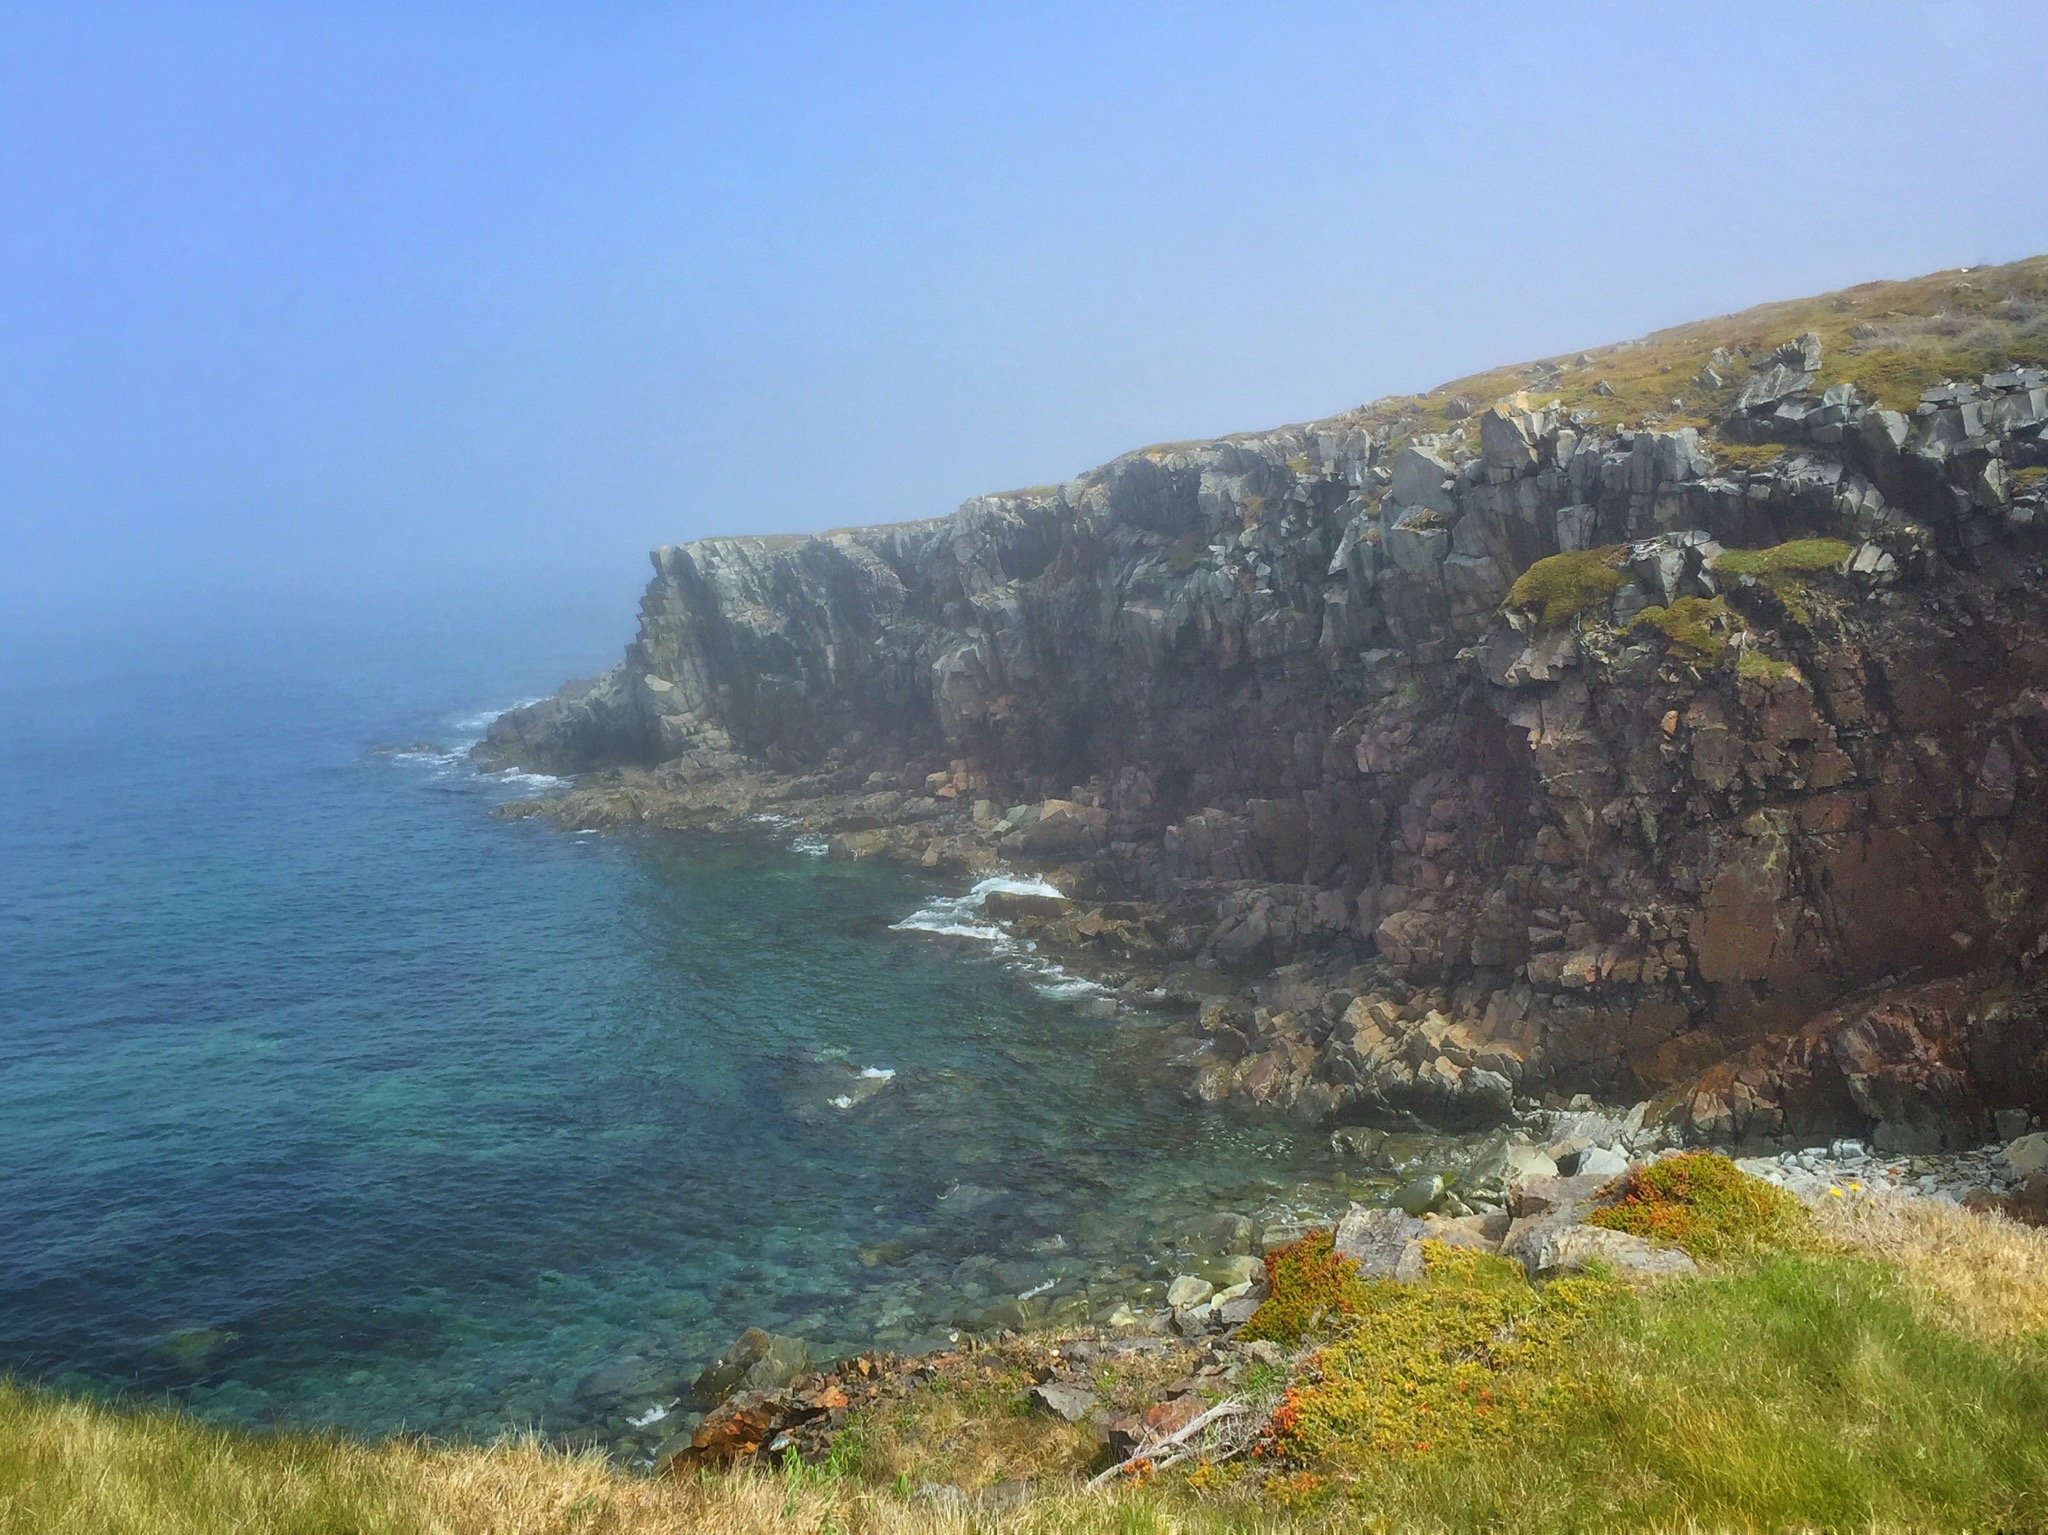 Island Home of the Puffins in Elliston